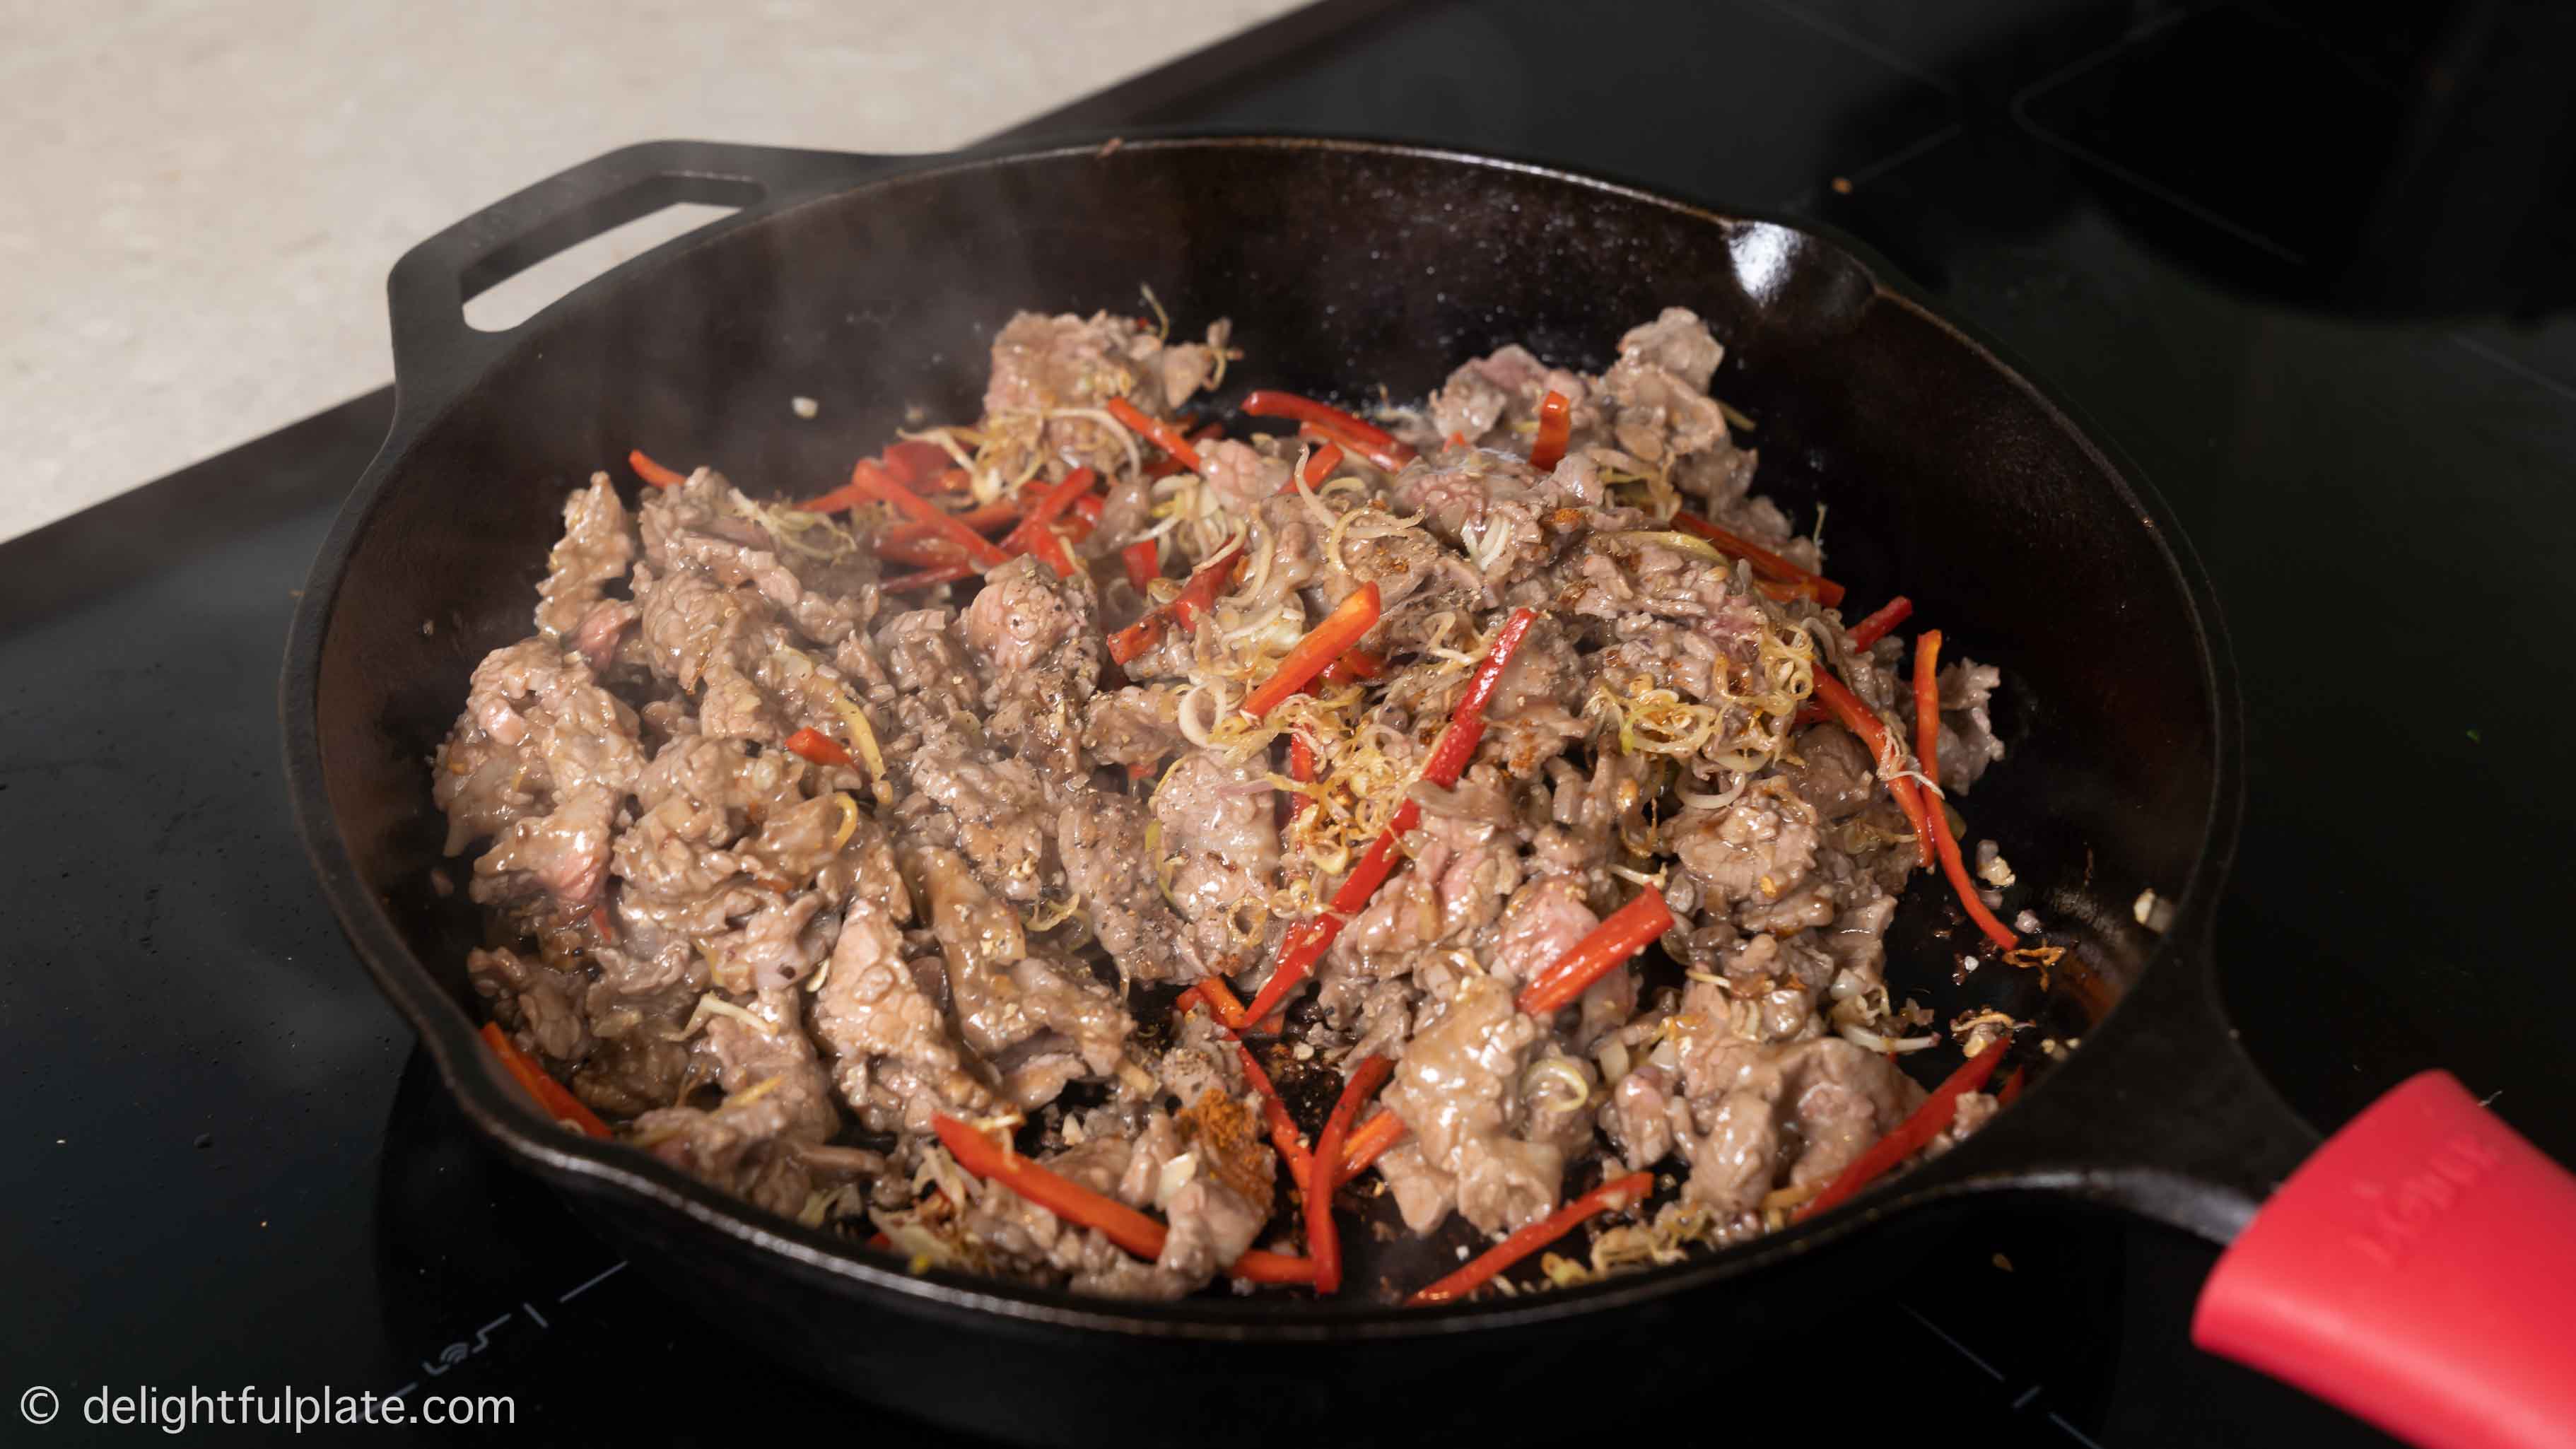 a skillet of stir-fried beef with lemongrass on the stovetop